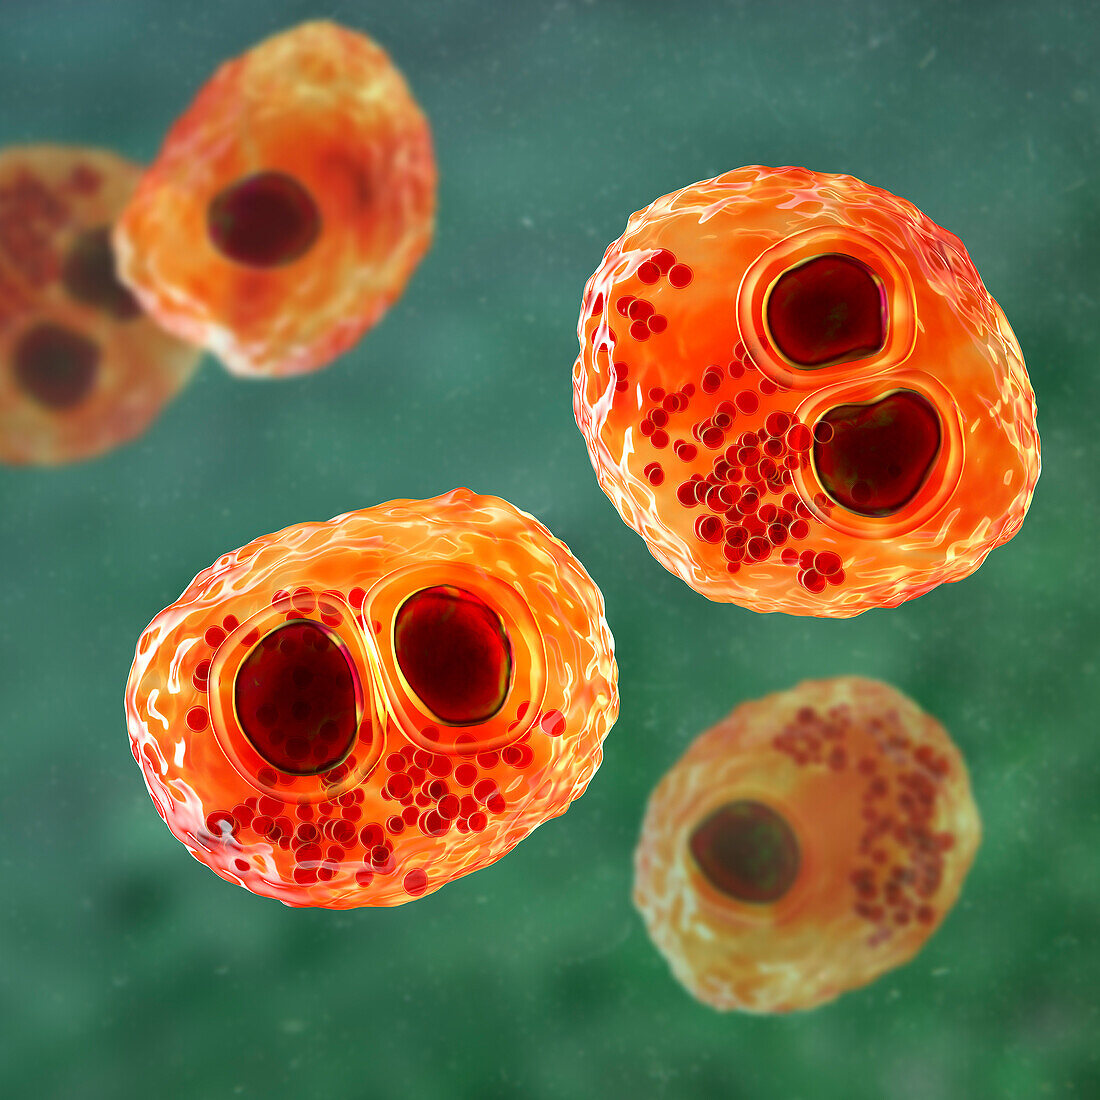 Human cytomegaloviruses in a cell, illustration